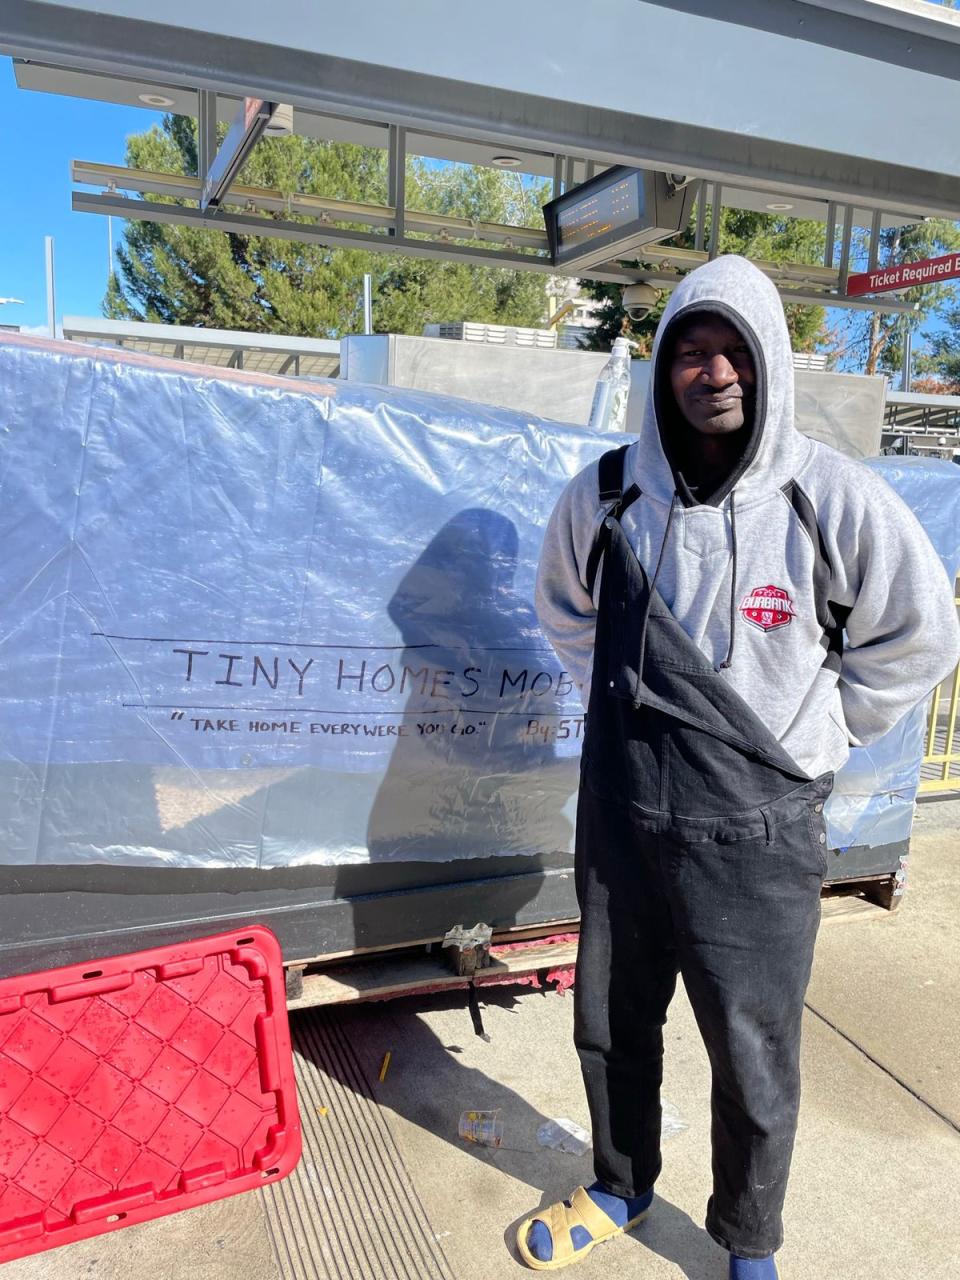 Ron, 37, a ‘builder extraordinaire’ built a makeshift shelter on wheels to last out the storm (Mike Bedigan/ The Independent)